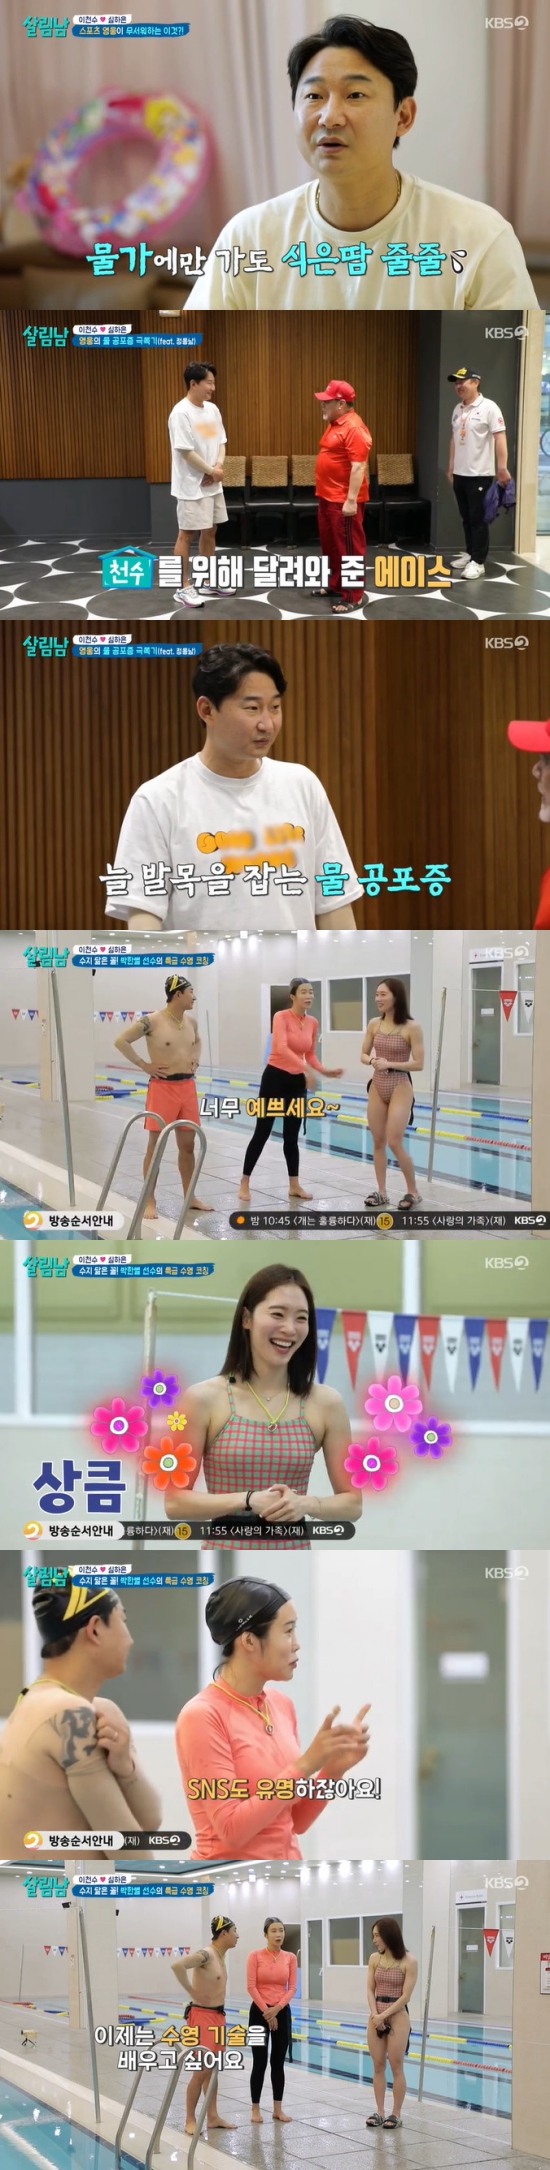 Former Soccer Athlete Lee Chun-soo got into a war of nerves with Sooyoung Athlete Park Han-byulLee Chun-soo and Shim Ha-eun learned Park Han-byul Athletes Sooyoung in KBS 2TV Salim mens season 2 (hereinafter referred to as salim nam2) broadcast on the 15th.Lee Chun-soo said, Why is the water dangerous and why do you take it? Lee said, Its fun.Lee Chun-soo said, Its a waste of time. How much do you have to play?Lee Chun-soo said, Father can not do Sooyoung Water is scary. If it is a bad situation, Father can not help you.In the water, he confessed.Lee Chun-soo said in an interview with the production team, I have a promulgation of water, so if I go to the water enough to have a trauma, I sweat. If there is one thing I can not do, it is Sooyoung I do not know the floating system itself.I have never practiced it, and Incheon is called the sea, but when you look at Incheon, there are many land. It is the king of Incheon, but it is on the land side.In the end, Lee Chun-soo decided to overcome water promulgation and learned Earth 2 Sooyoung from Jung Dong-nam, a lifeguard.Lee Chun-soo was able to get acquainted with the water thanks to Jung Dong-nam, and decided to learn Sooyoung skills in earnest and went to Park Han-byul Athlete with Shim Ha-eun.Shim Ha-eun admired Park Han-byul Athletes beauty and praised her, saying, Shes pretty, shes very clear to look at, and shes very famous on Instagram.Lee Chun-soo said, I learned Earth 2 Sooyoung enough to cross the Pacific Ocean yesterday, and the water is not as scary as before, so I want to learn Sooyoung properly.When the children go to the sea or something like this, Father should know Sooyoung Shim Ha-eun asked, Is Sooyoung difficult? Is soccer difficult? and Park Han-byul Athlete expressed his pride, saying, Is Sooyoung more difficult?Lee Chun-soo said, Ive lived my life as a scoundrel. I always run on the mountain and run on the playground. If I dont get scoundrels more than 10 times a day, I cant sleep.Park Han-byul Athlete said, We play Sooyoung about 13km in practice.In particular, Park Han-byul Athlete provoked, saying, Hes a striker, but he has more timing to breathe than defense, and Lee Chun-soo suspected, Have you ever met Athlete in soccer? Isnt he Athlete in boyfriend football?Picture = KBS broadcast screen